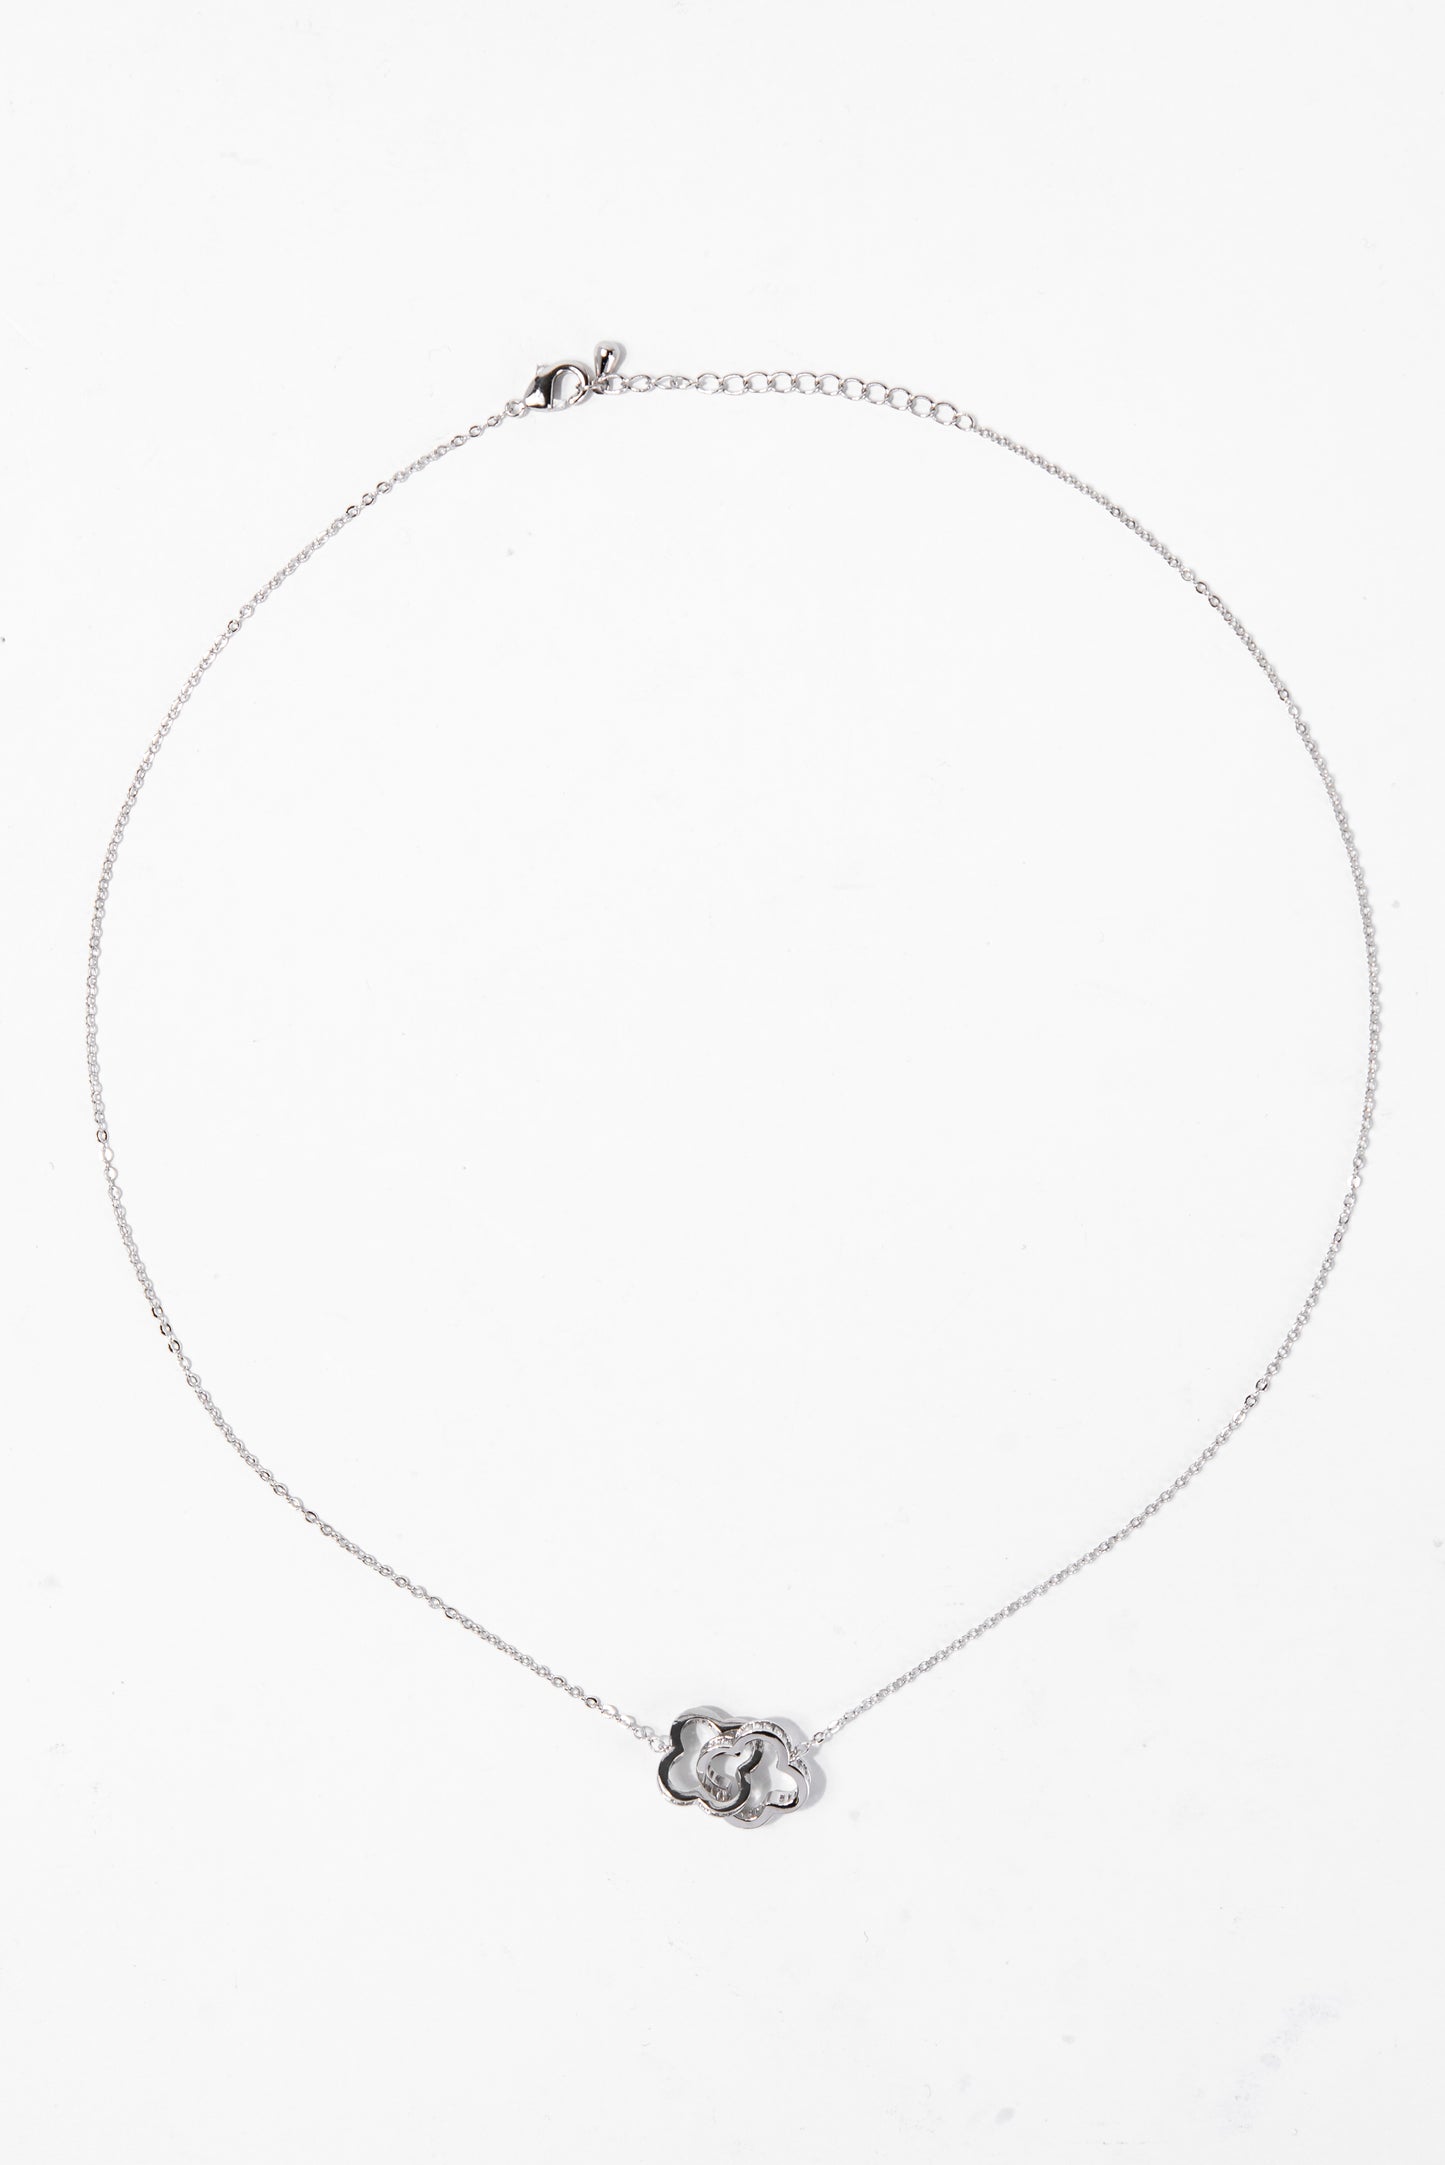 Ash Floral Double CZ White Gold Plated Necklace